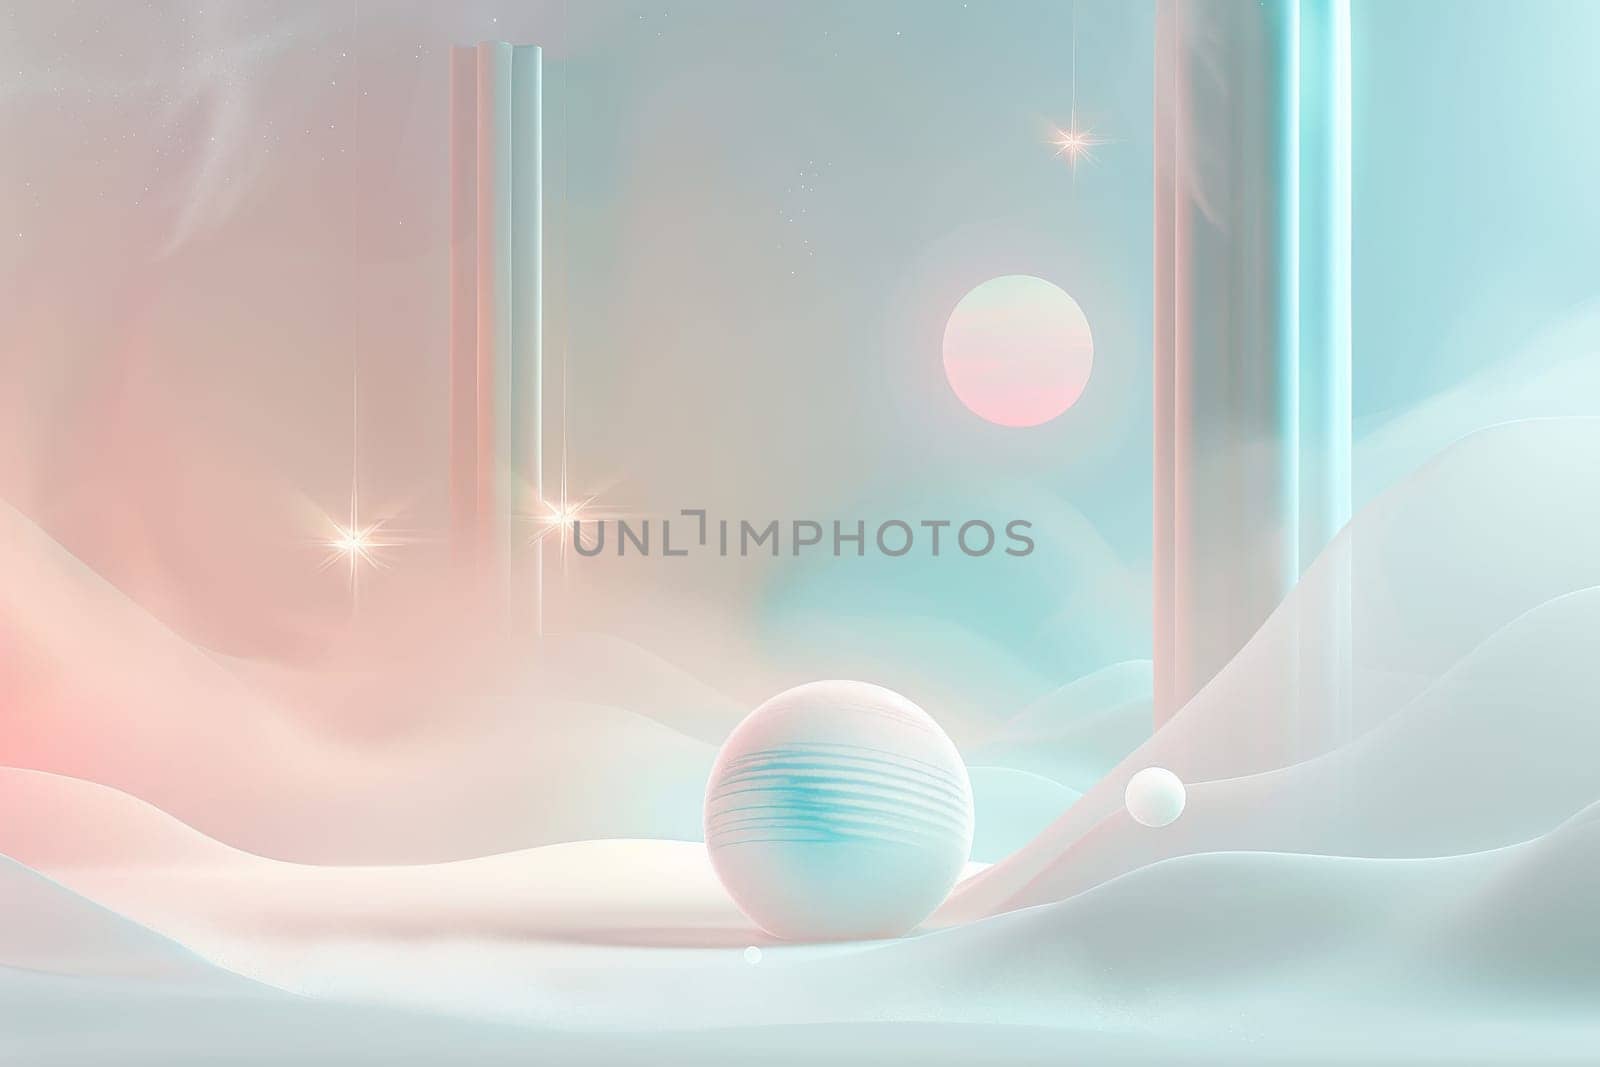 A white ball is on a snowy surface in a space with a pink and blue background by itchaznong